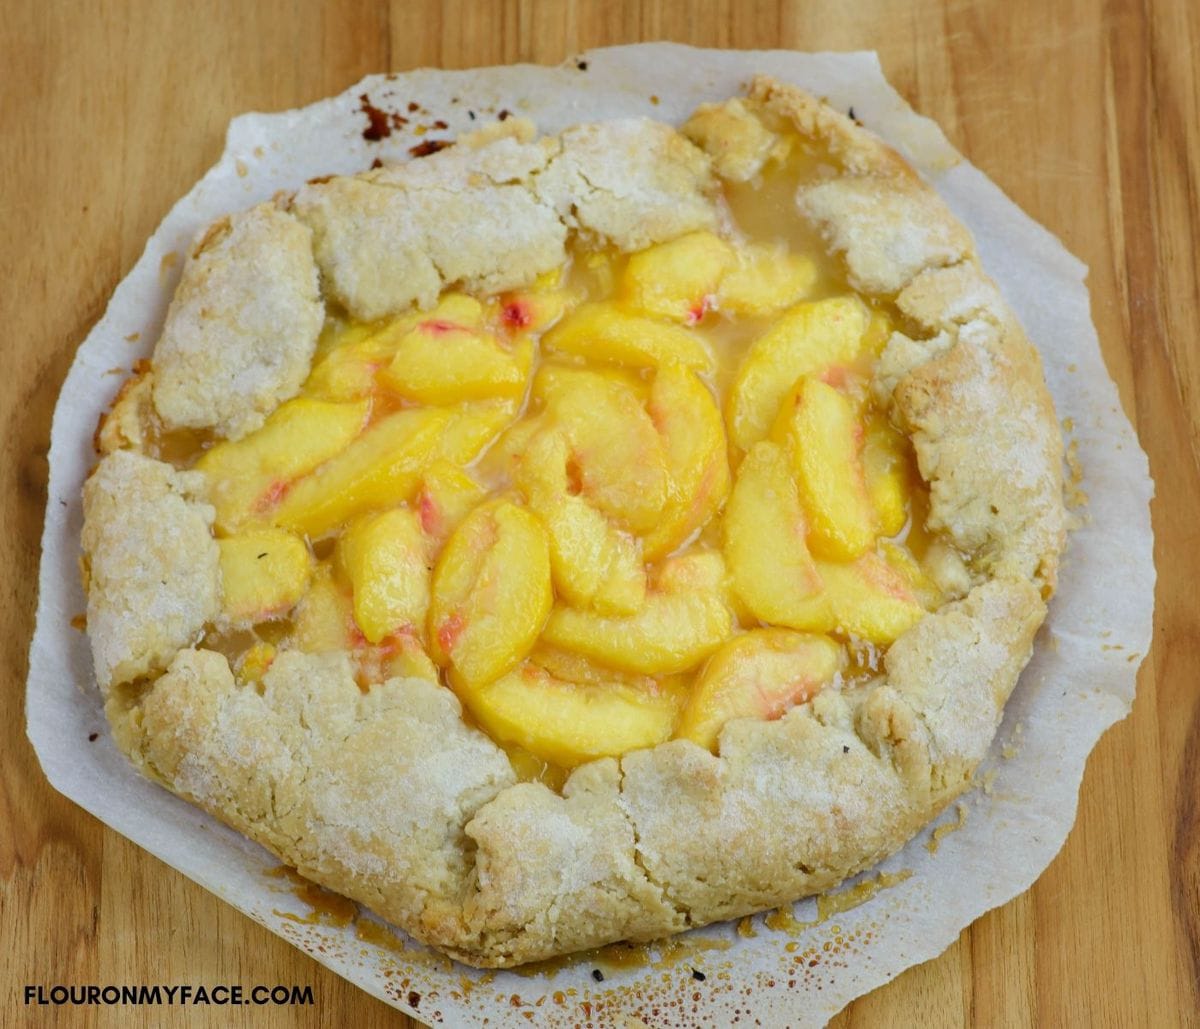 A freshly baked peach galette on a wooden cutting board.